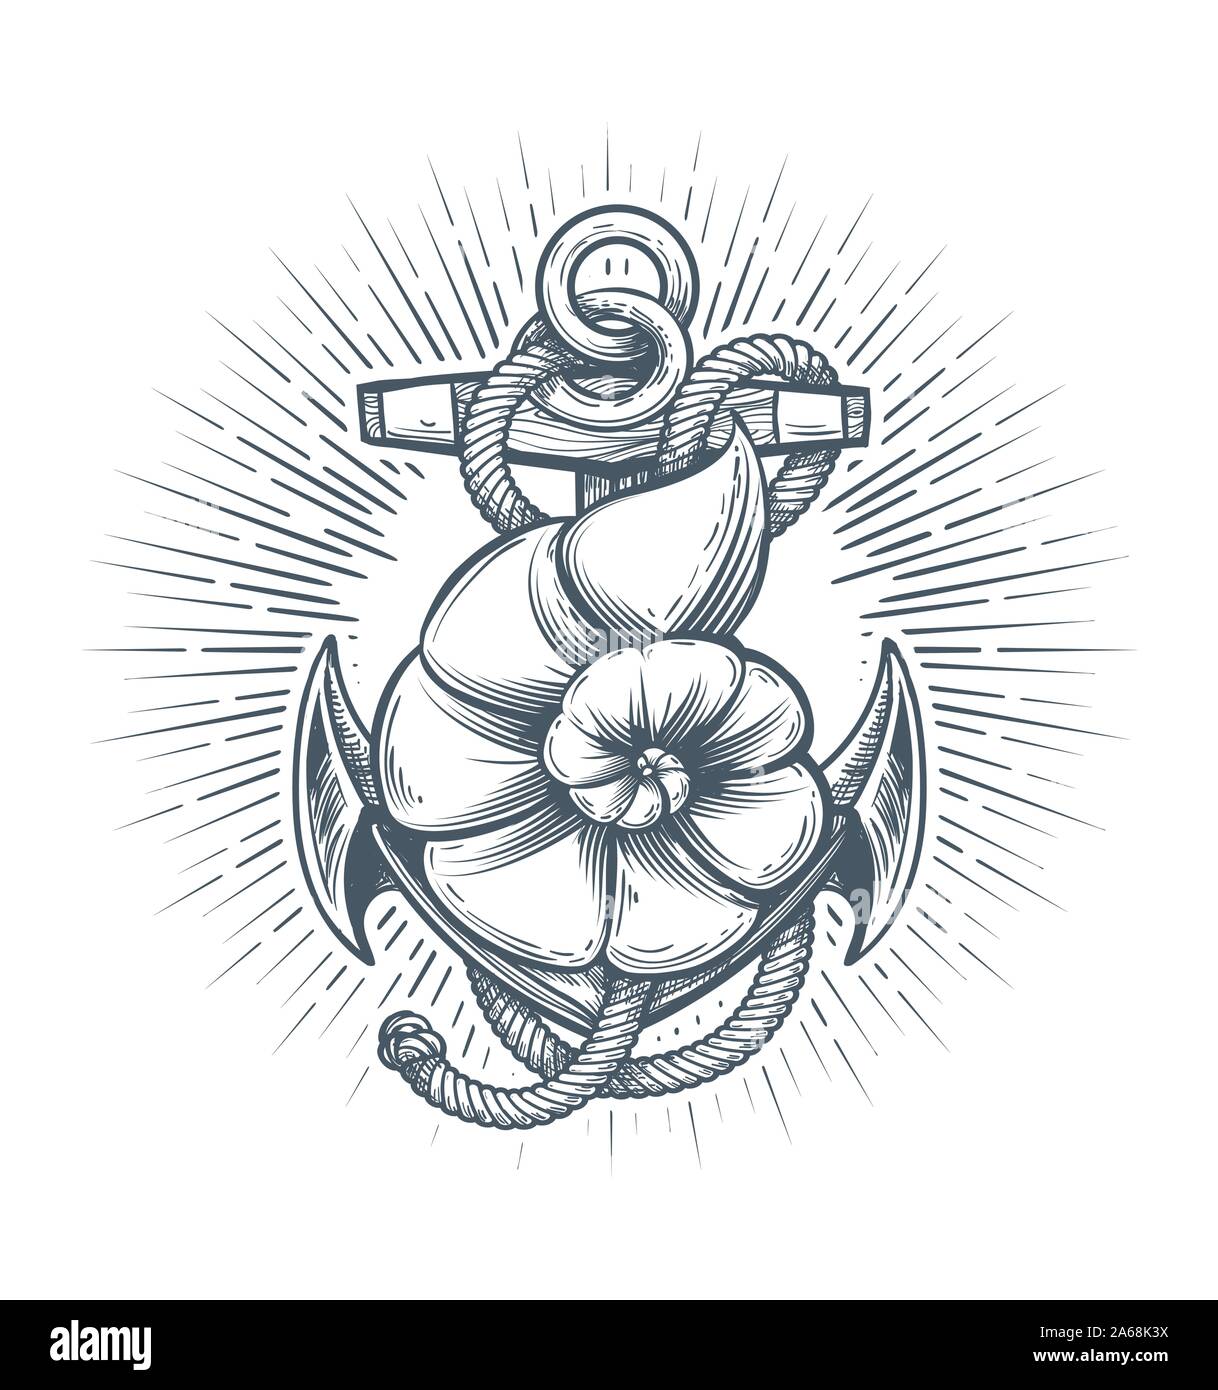 Retro Emblem of Anchor with Seashell drawn in tattoo style. Vector illustration. Stock Vector